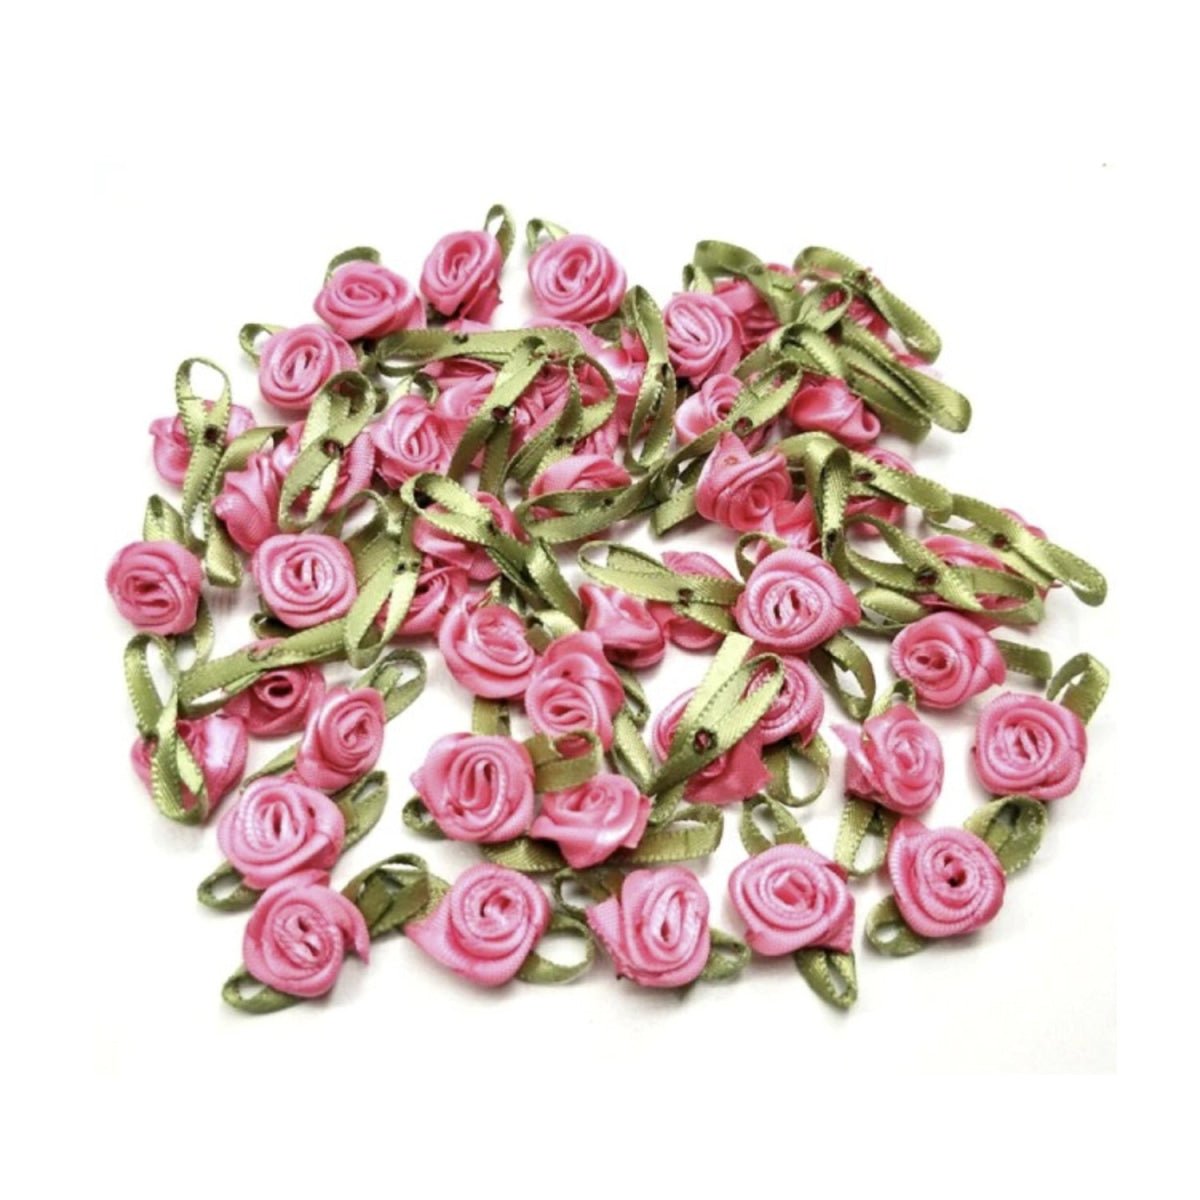 40pcs Mini Artificial Flowers Heads Small Ribbon Roses DIY Crafts Wedding Decorations - Fuscia - - Asia Sell